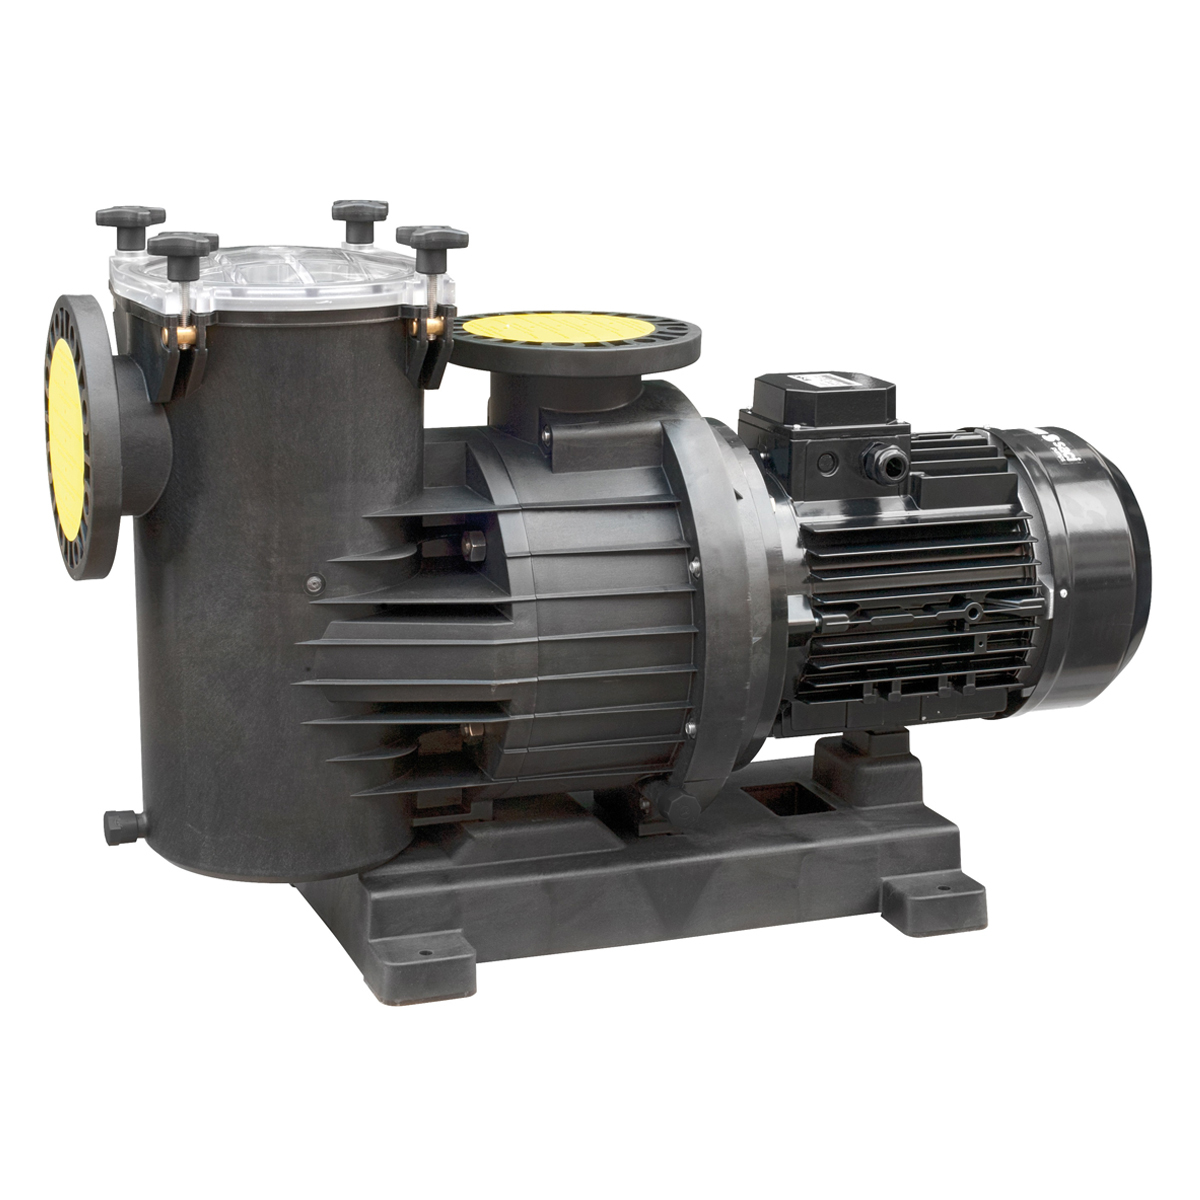 Smart Power Filter Pump 1500 400-690V, 2850 rpm 11 kW, 15 HP, 177 m³/h at 10m Smart Power Filter Pump 1500 400-690V, 2850 rpm 11 kW, 15 HP, 177 m³/h at 10m